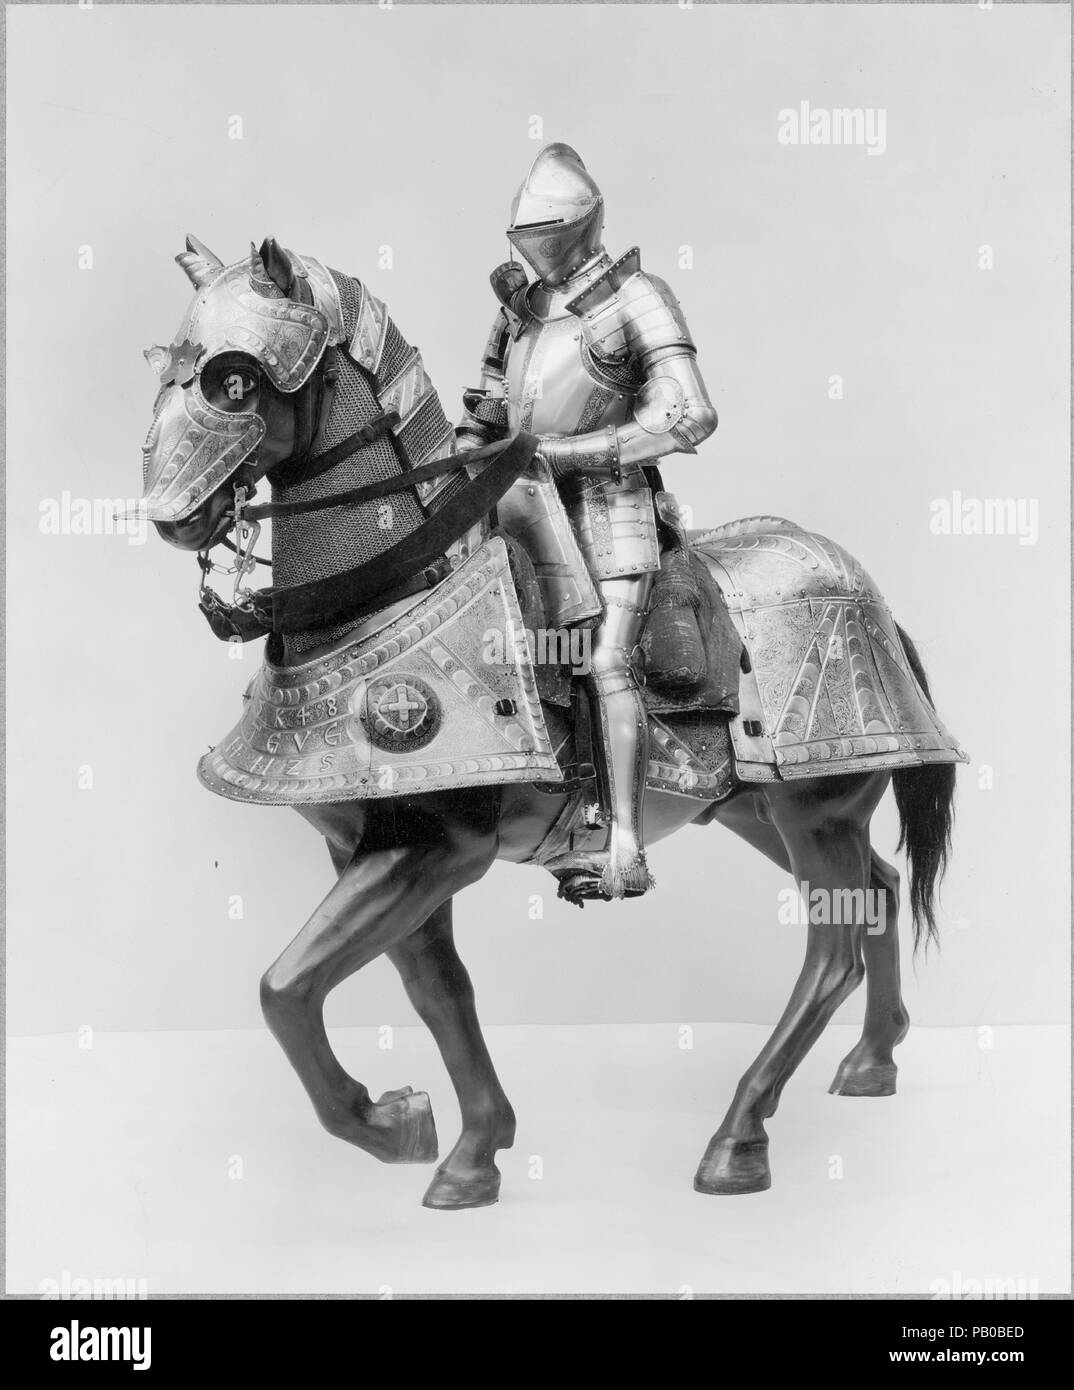 Horse Armor Made for Johann Ernst, Duke of Saxony-Coburg (1521-1553). Armorer: Kunz Lochner (German, Nuremberg, 1510-1567). Culture: German, Nuremberg. Dimensions: Wt. including saddle 92 lb. (41.73 kg); bit: H. 6 in (15.2 cm); W. 11 in (27.9 cm). Date: dated 1548.  Kunz Lochner was one of the few Nuremberg armorers of the mid-sixteenth century to achieve an international reputation. His patrons included the Holy Roman Emperor, the dukes of Saxony, and the king of Poland. This horse armor bears only the Nuremberg mark but can be attributed to Lochner on stylistic grounds. The elaborately embos Stock Photo